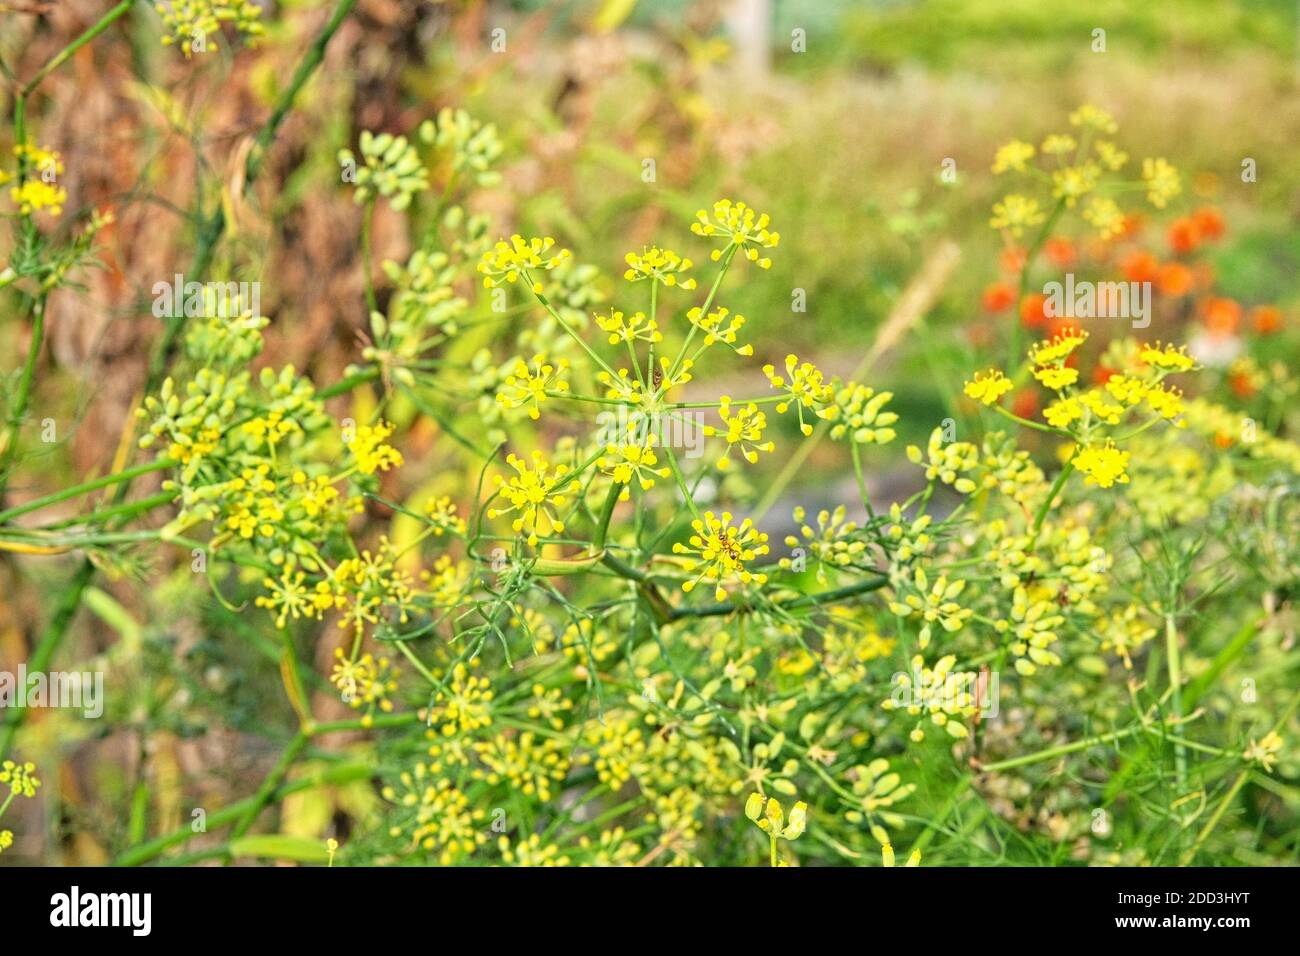 Star anise flowers bloom in the meadow. Many small yellow flowers grow in the farmers garden. Stock Photo